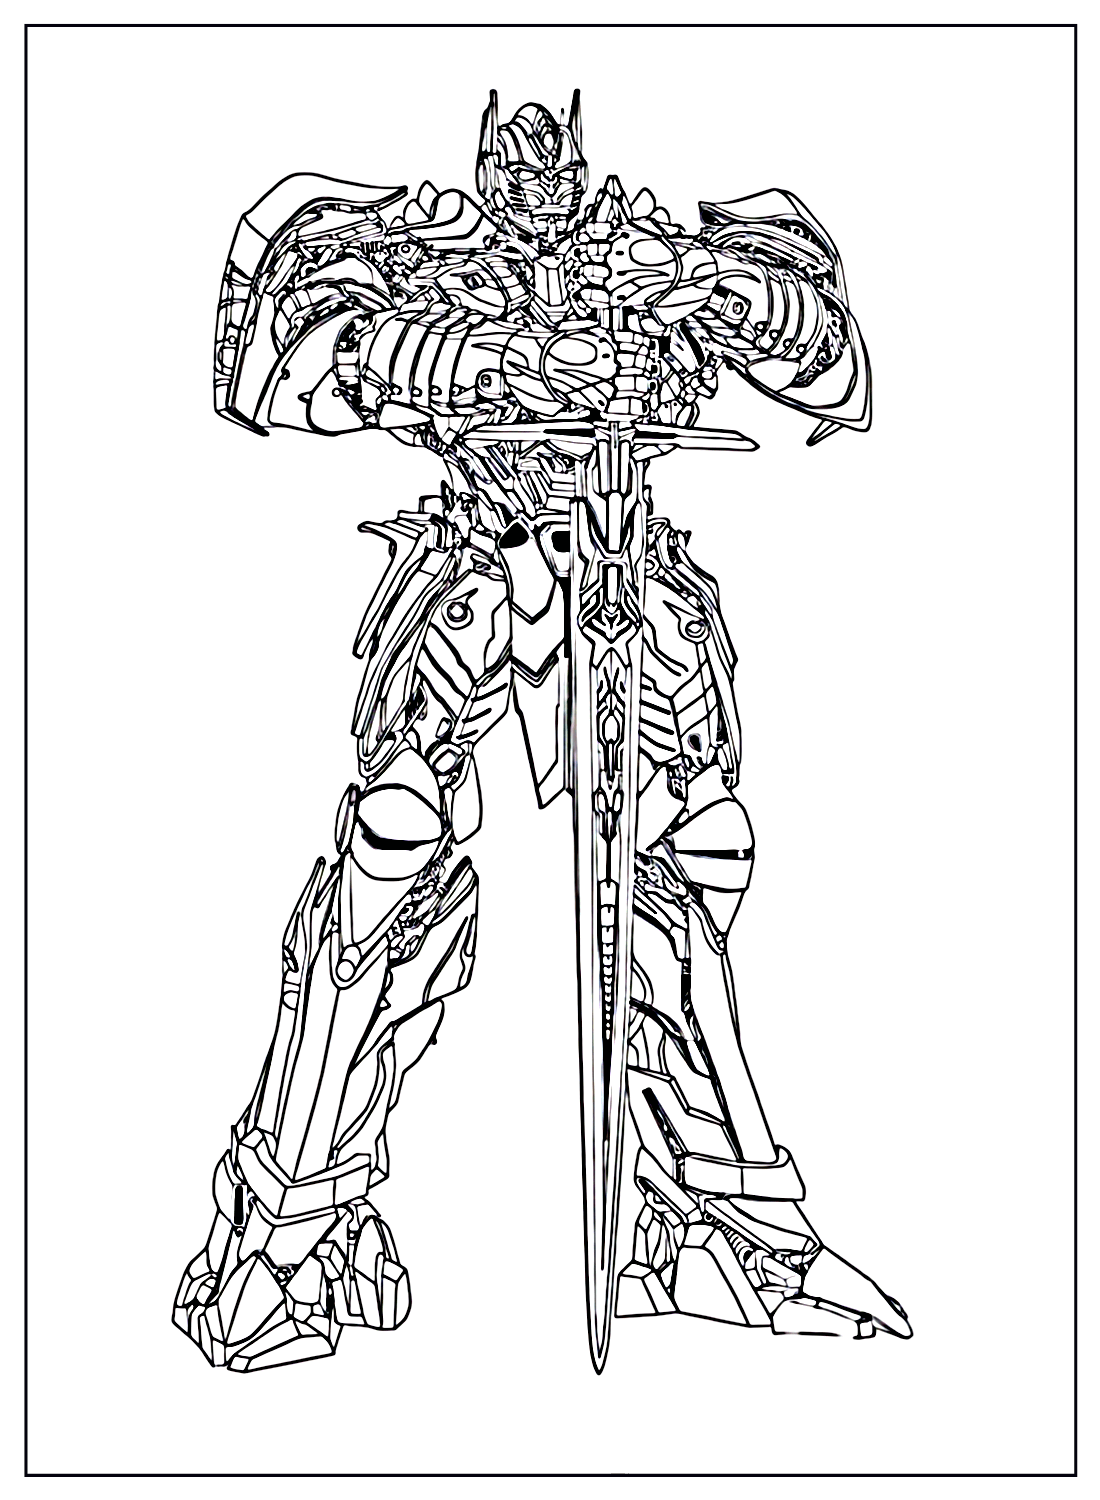 Coloring Page Transformers Age Of Extinction from Transformers: Age Of Extinction